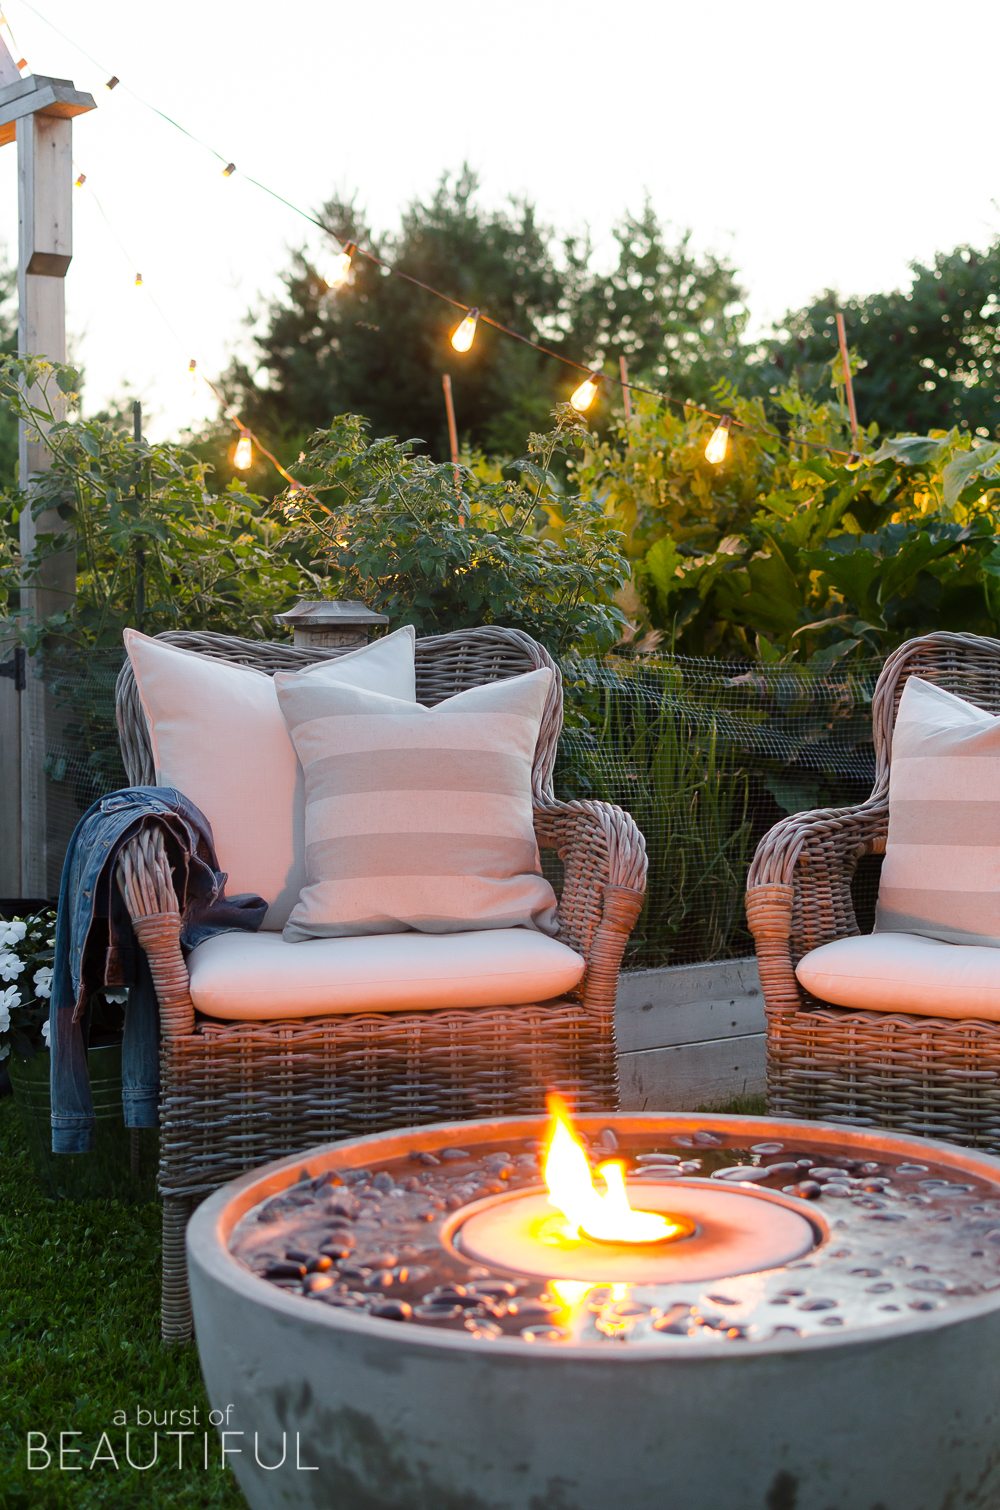 Create a cozy outdoor living space with ambiance using a fire fountain and Edison string lights.